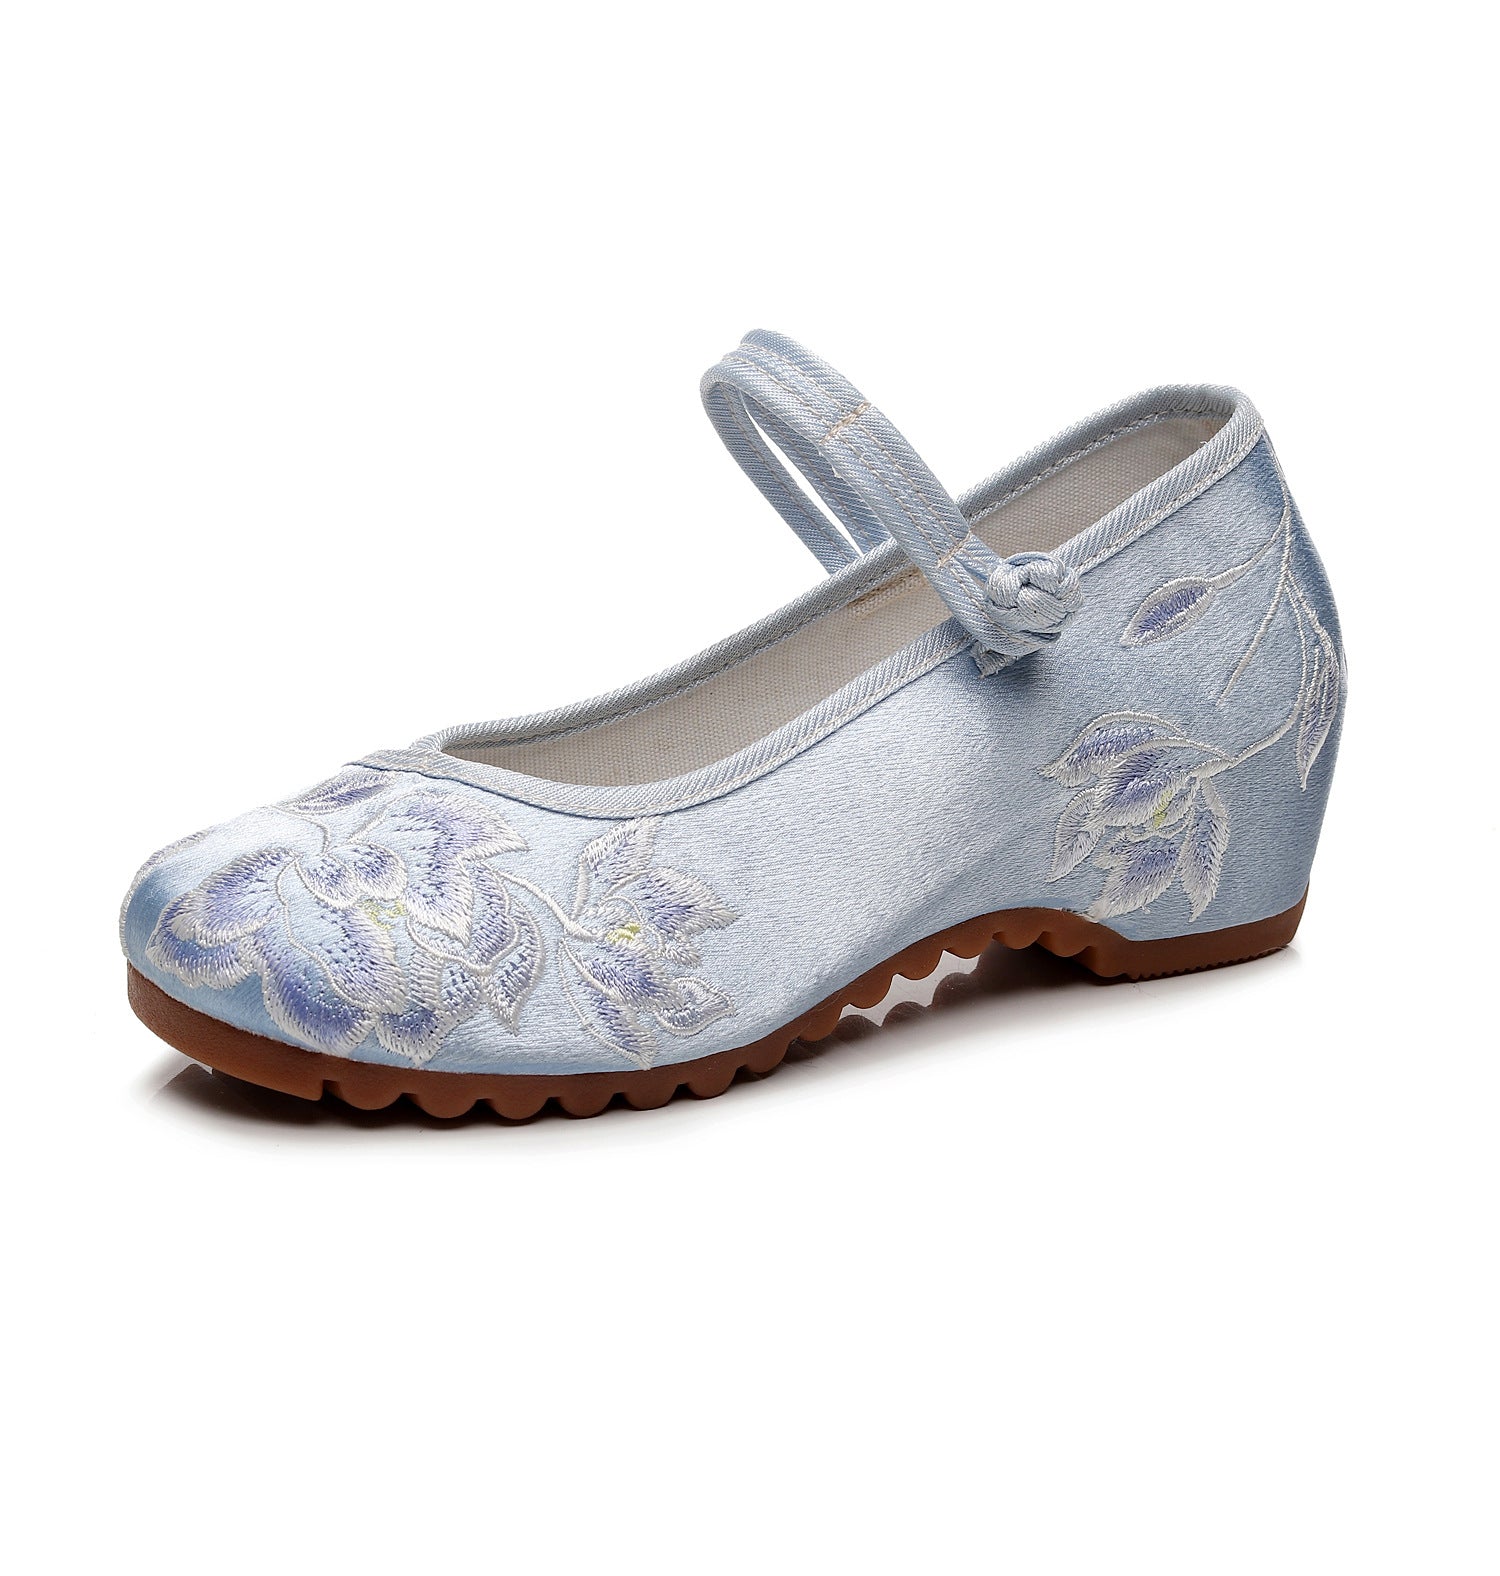 Women's Toe Invisible Elevated Cheongsam Antique Embroidered Canvas Shoes